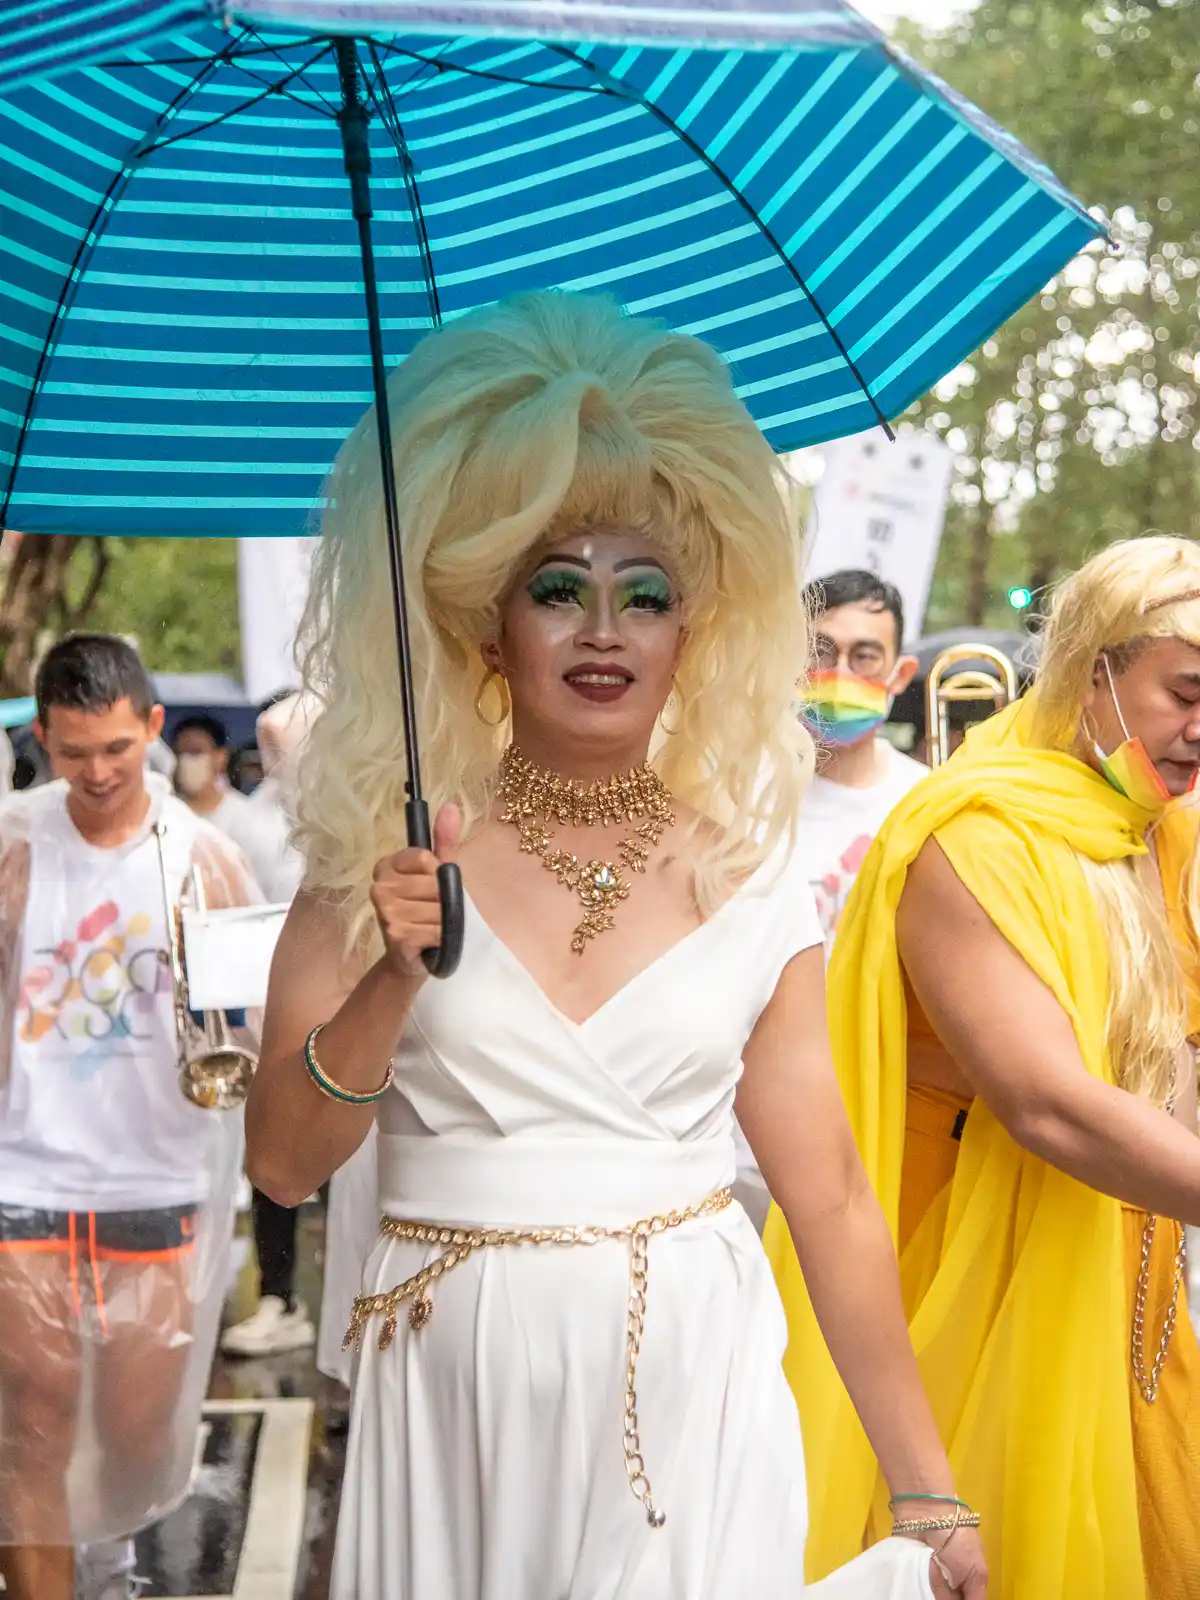 A woman in drag holds an umbrella while marching.